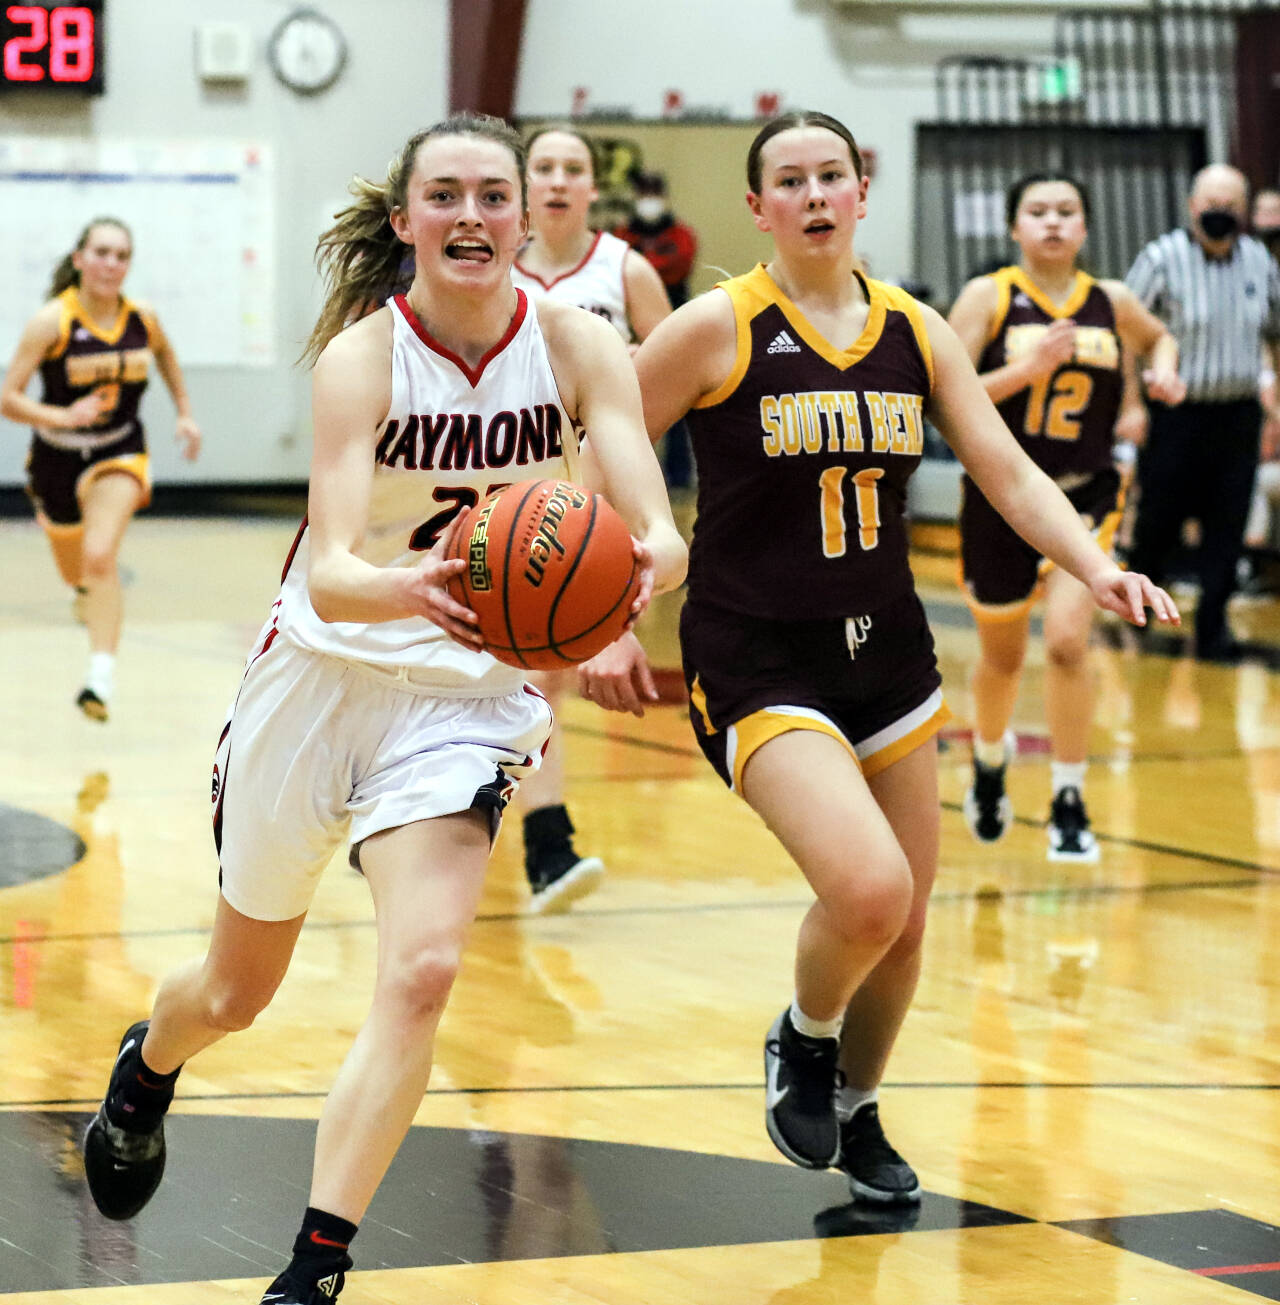 PHOTO BY LARRY BALE Raymond’s Kyra Gardner, left, drives to the basket against South Bend’s Reece Williams during the Seagulls 66-4 victory on Thursday in Raymond.